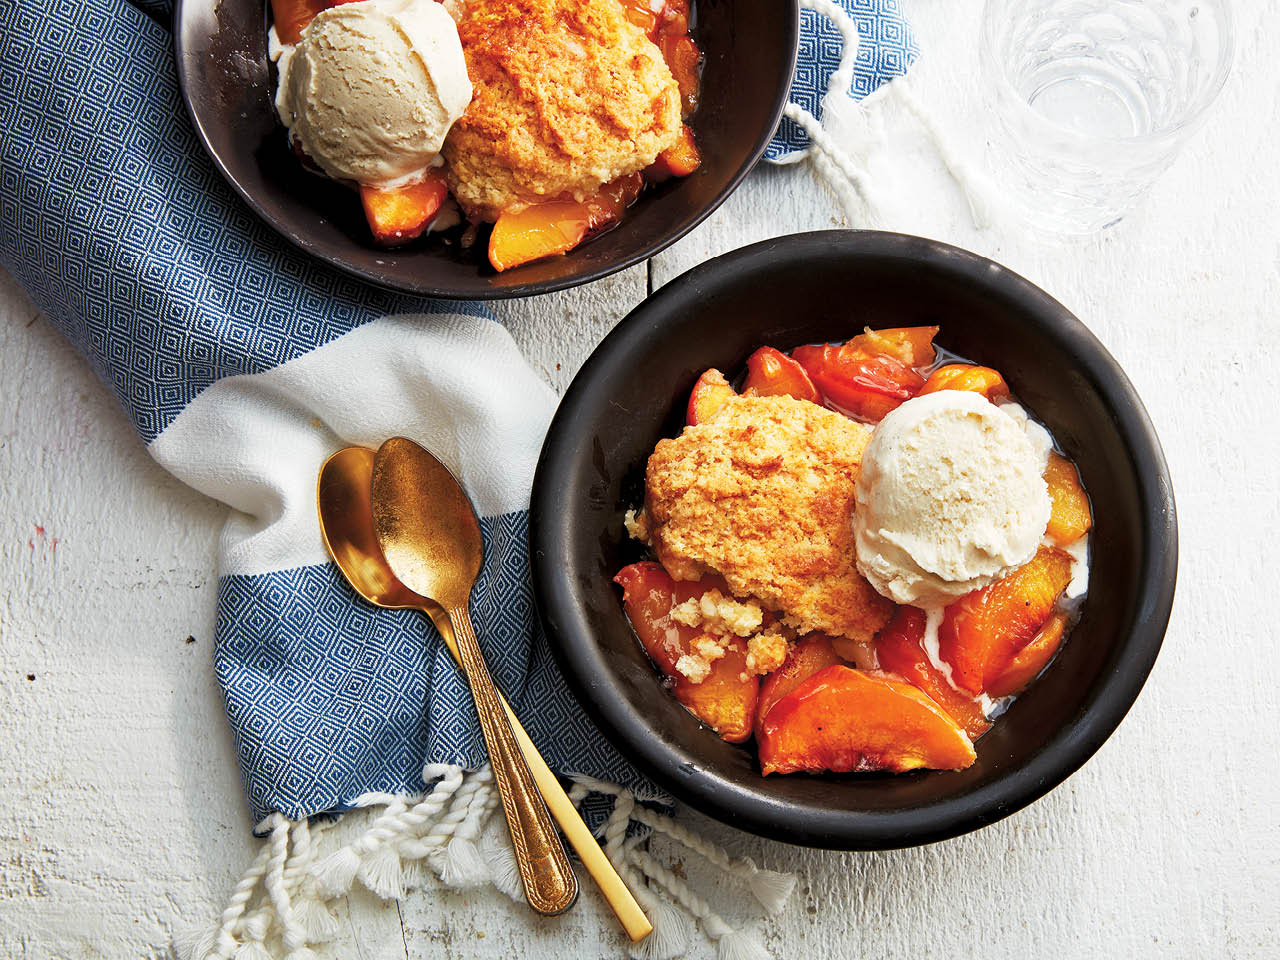 Cobbler recipes: Classic peach cobbler topped with ice cream in a black bowl